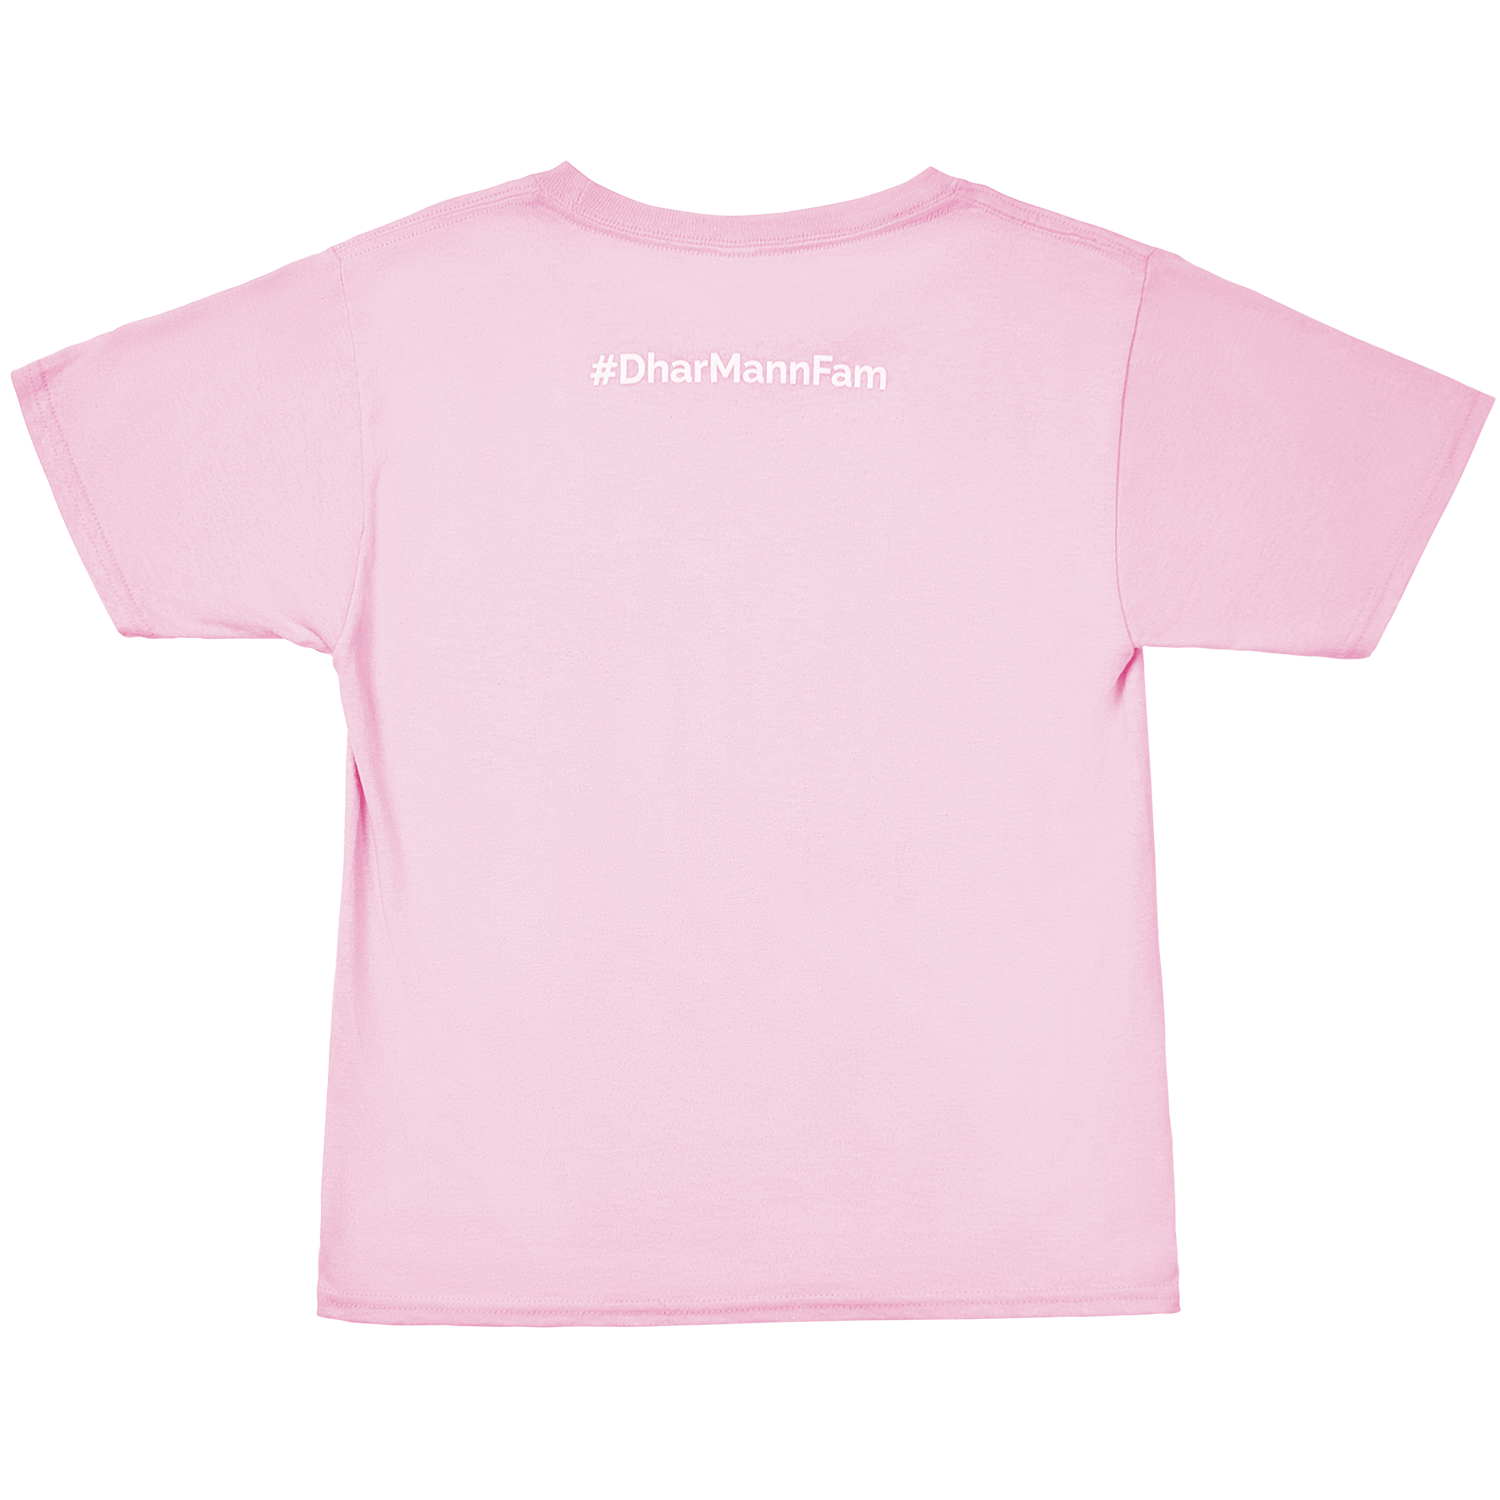 So You See Youth T-Shirt (Pink) Youth Medium / Pink